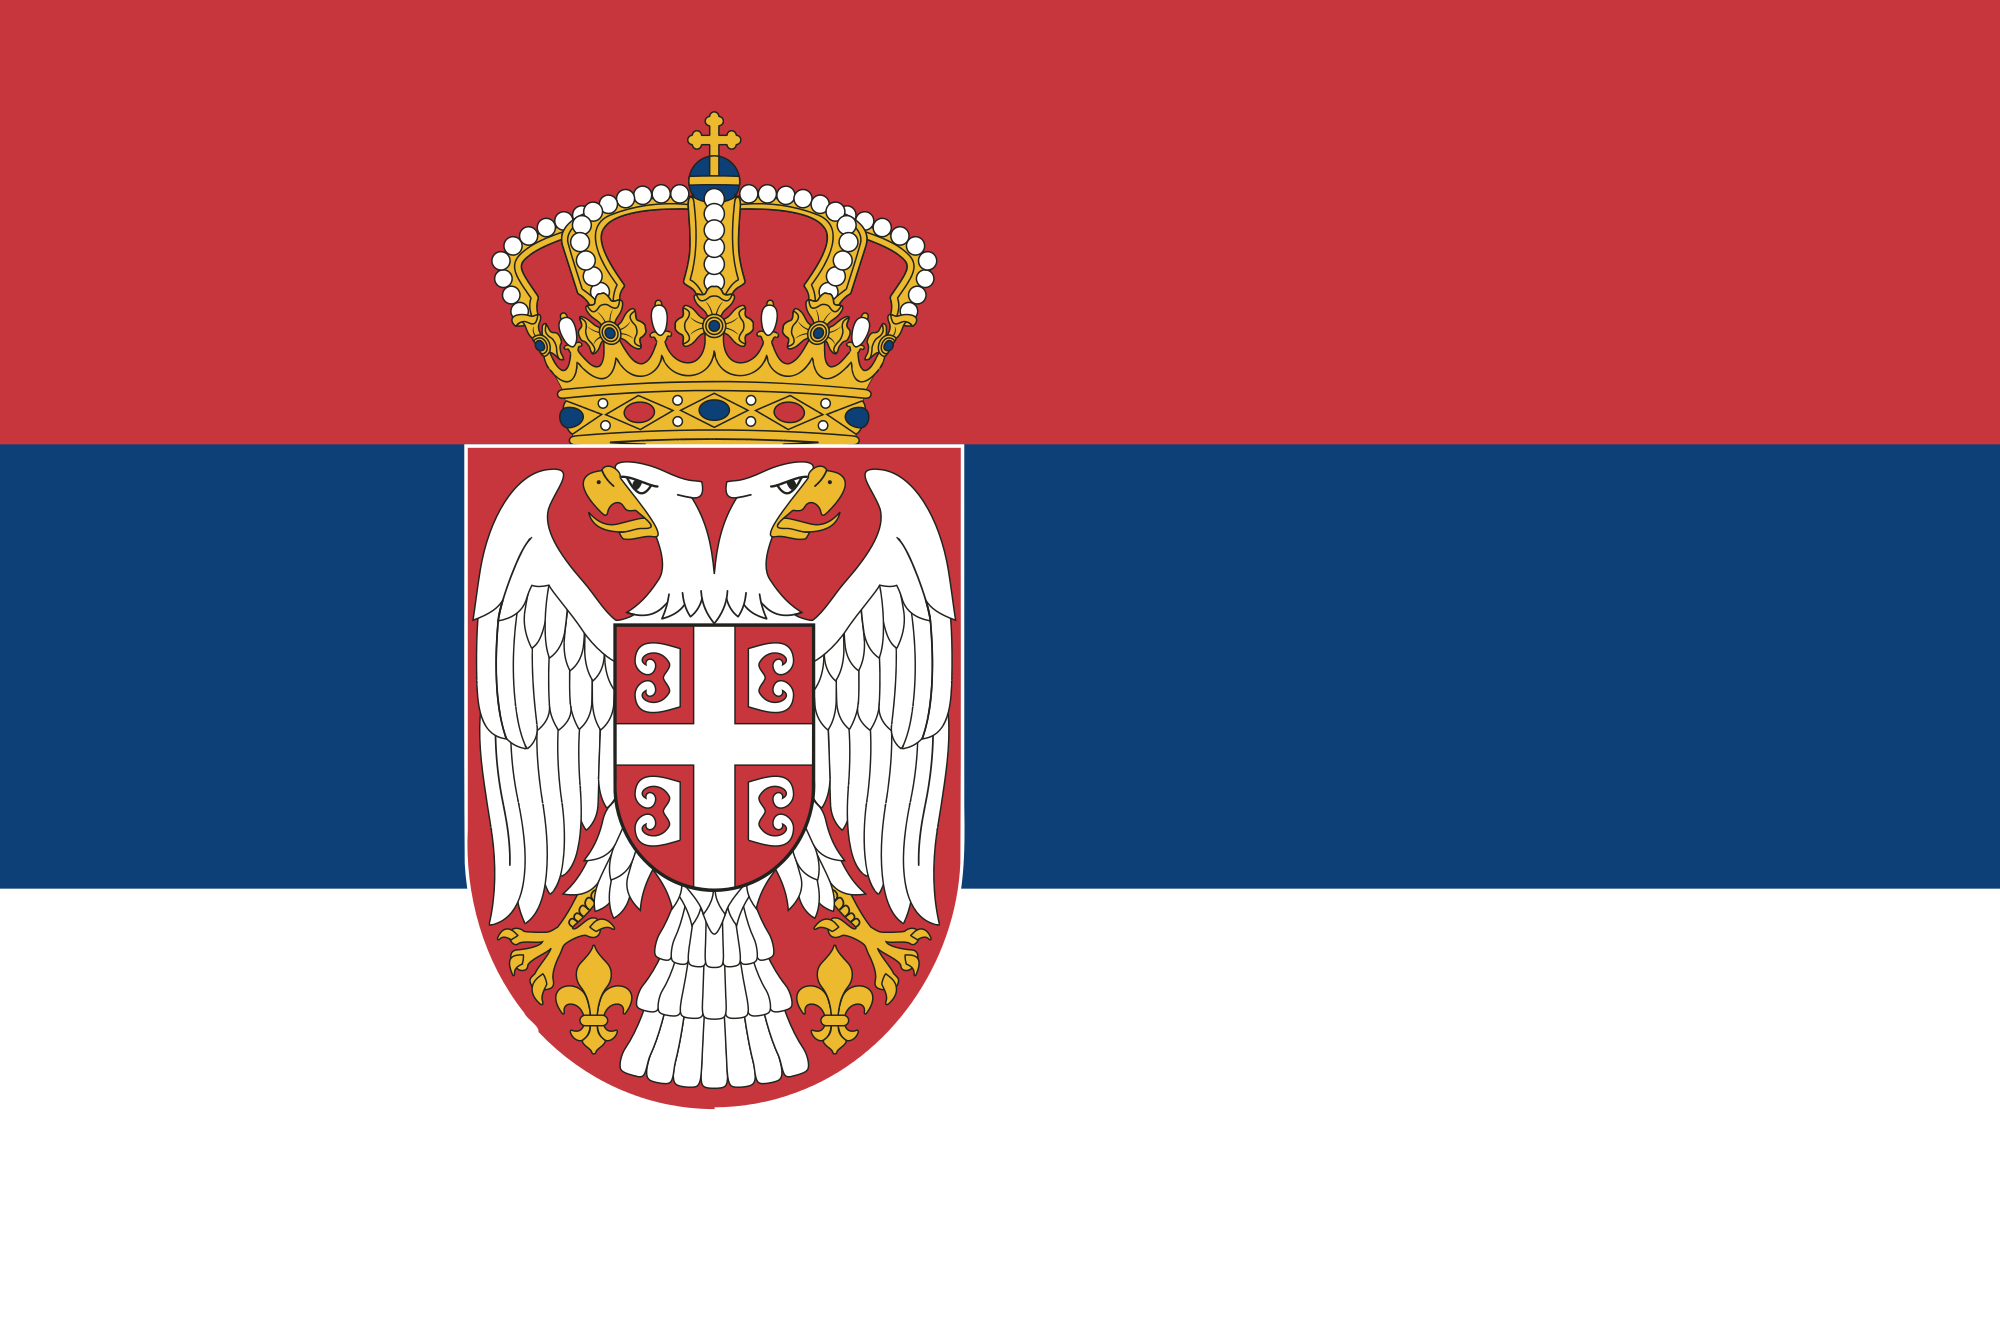 https://upload.wikimedia.org/wikipedia/commons/thumb/f/ff/Flag_of_Serbia.svg/2000px-Flag_of_Serbia.svg.png